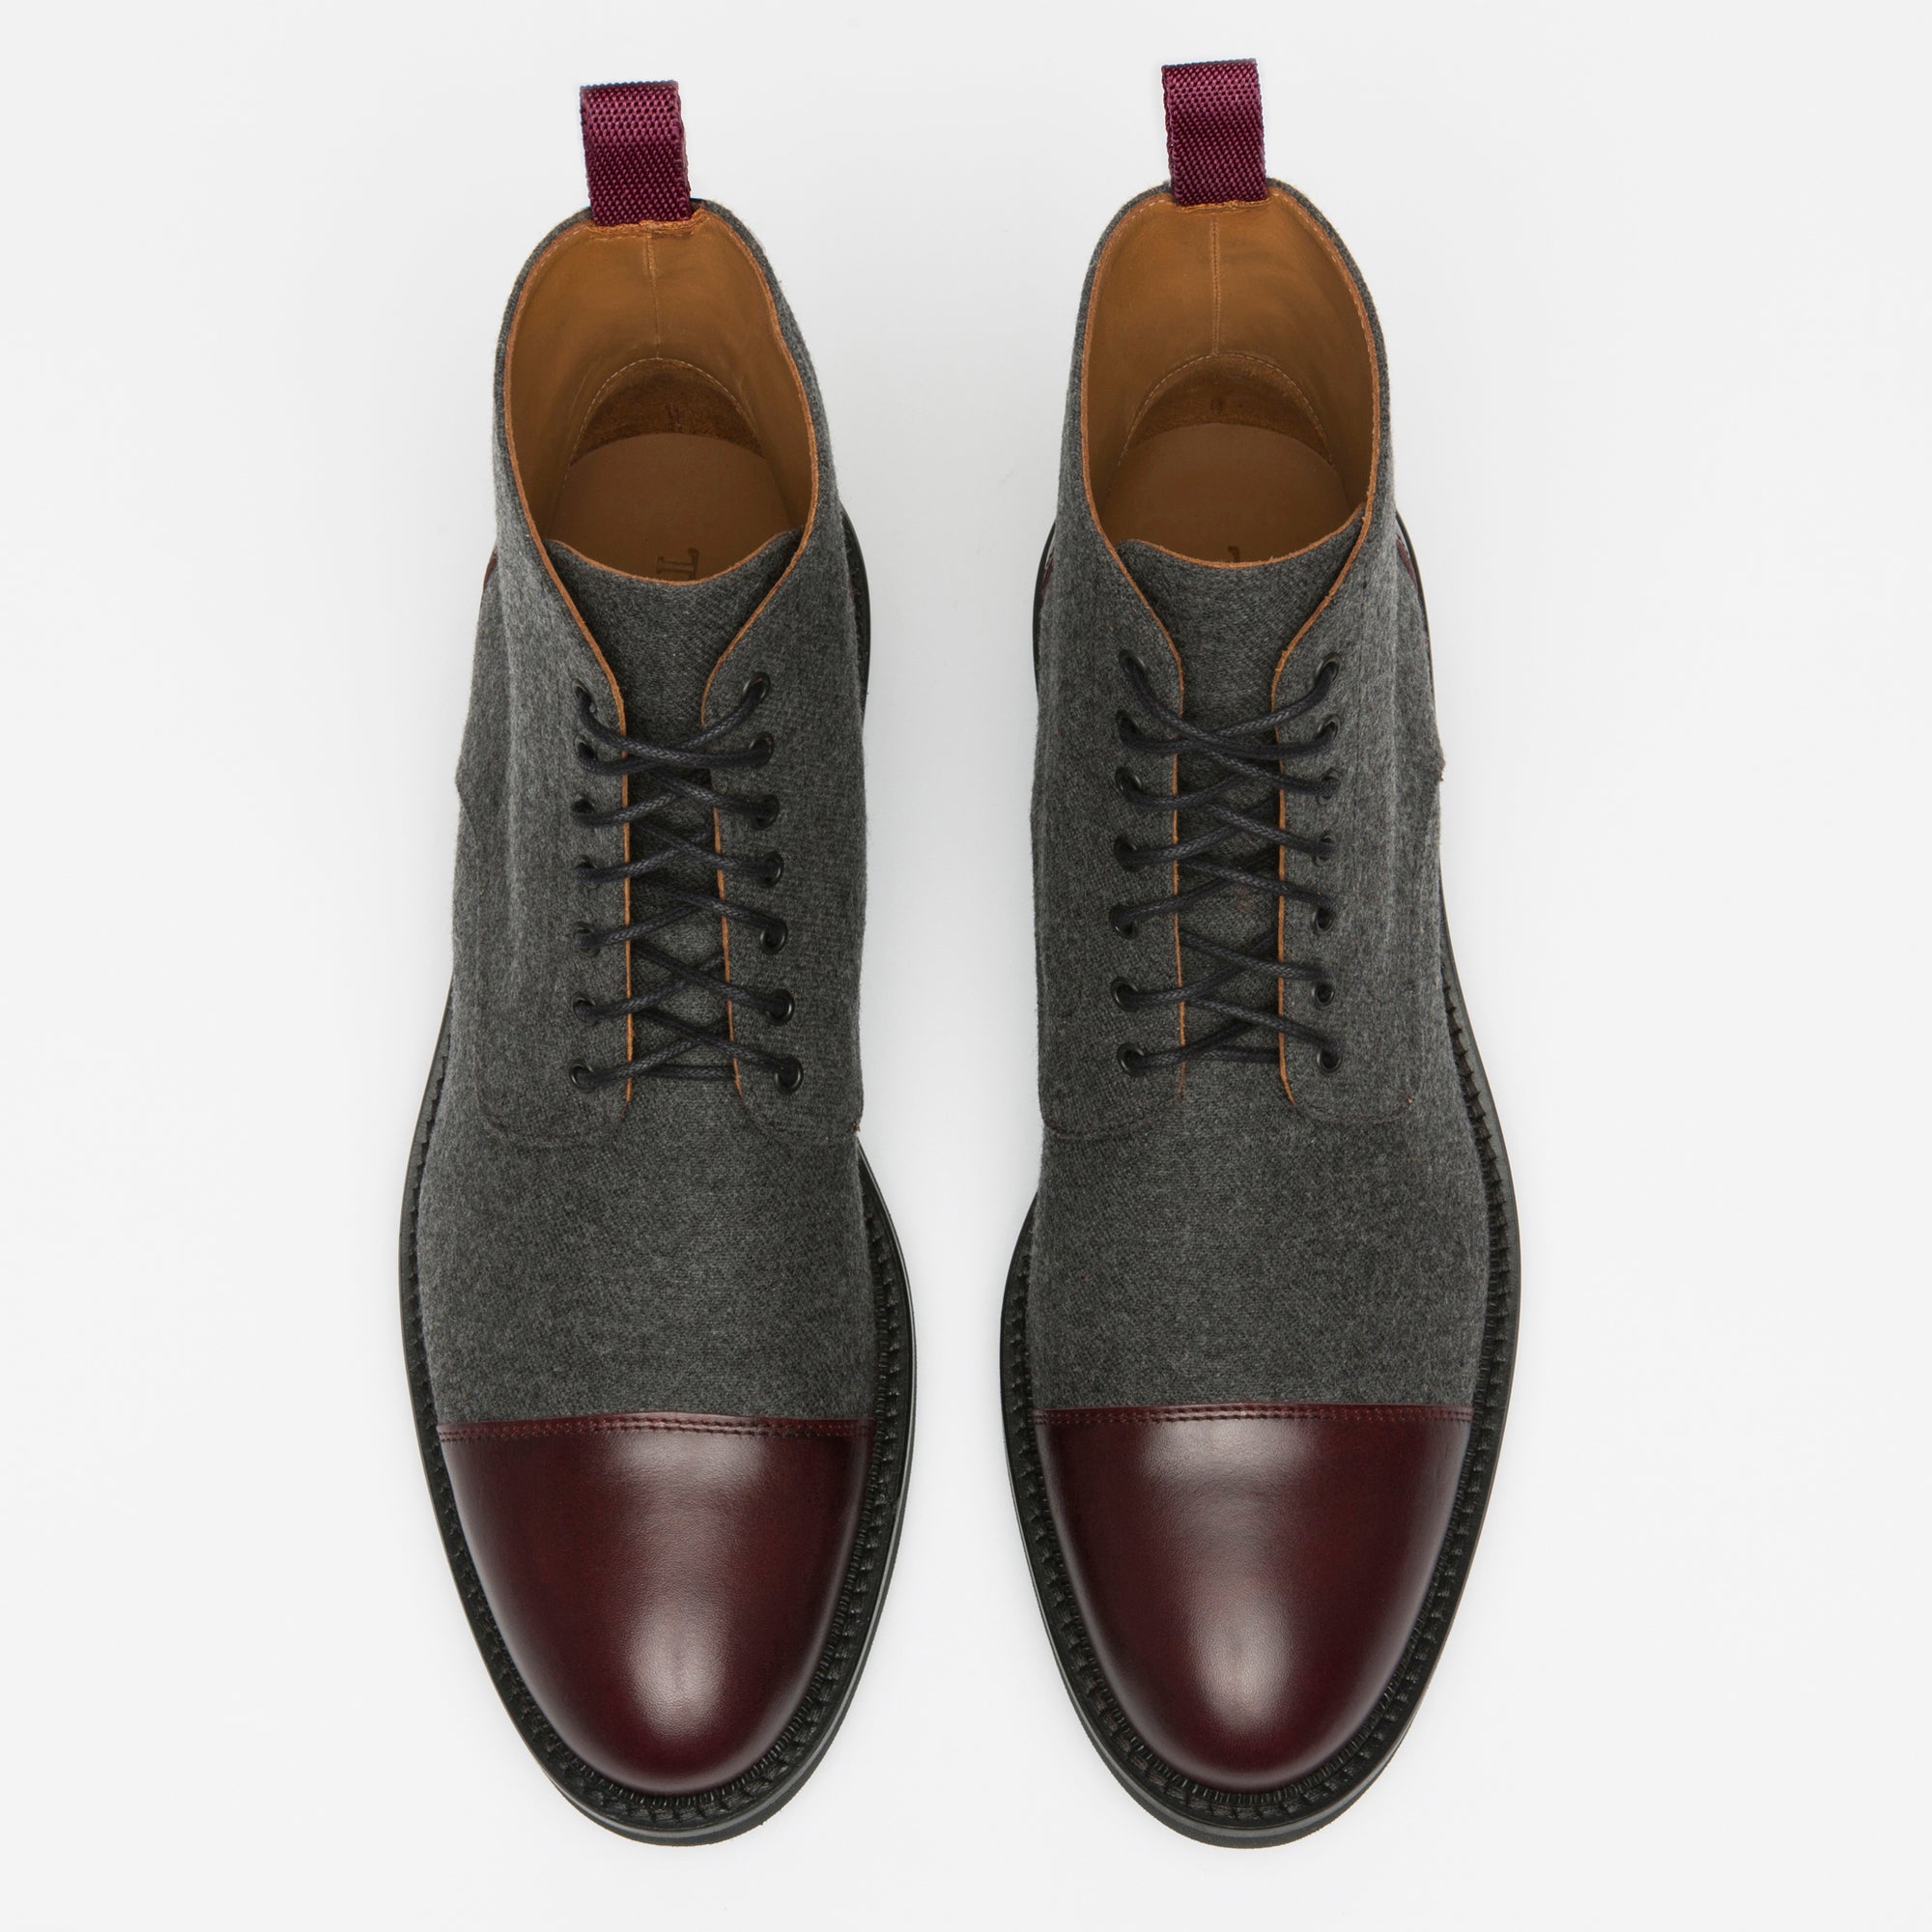 The Jack Boot in Grey Oxblood over head view